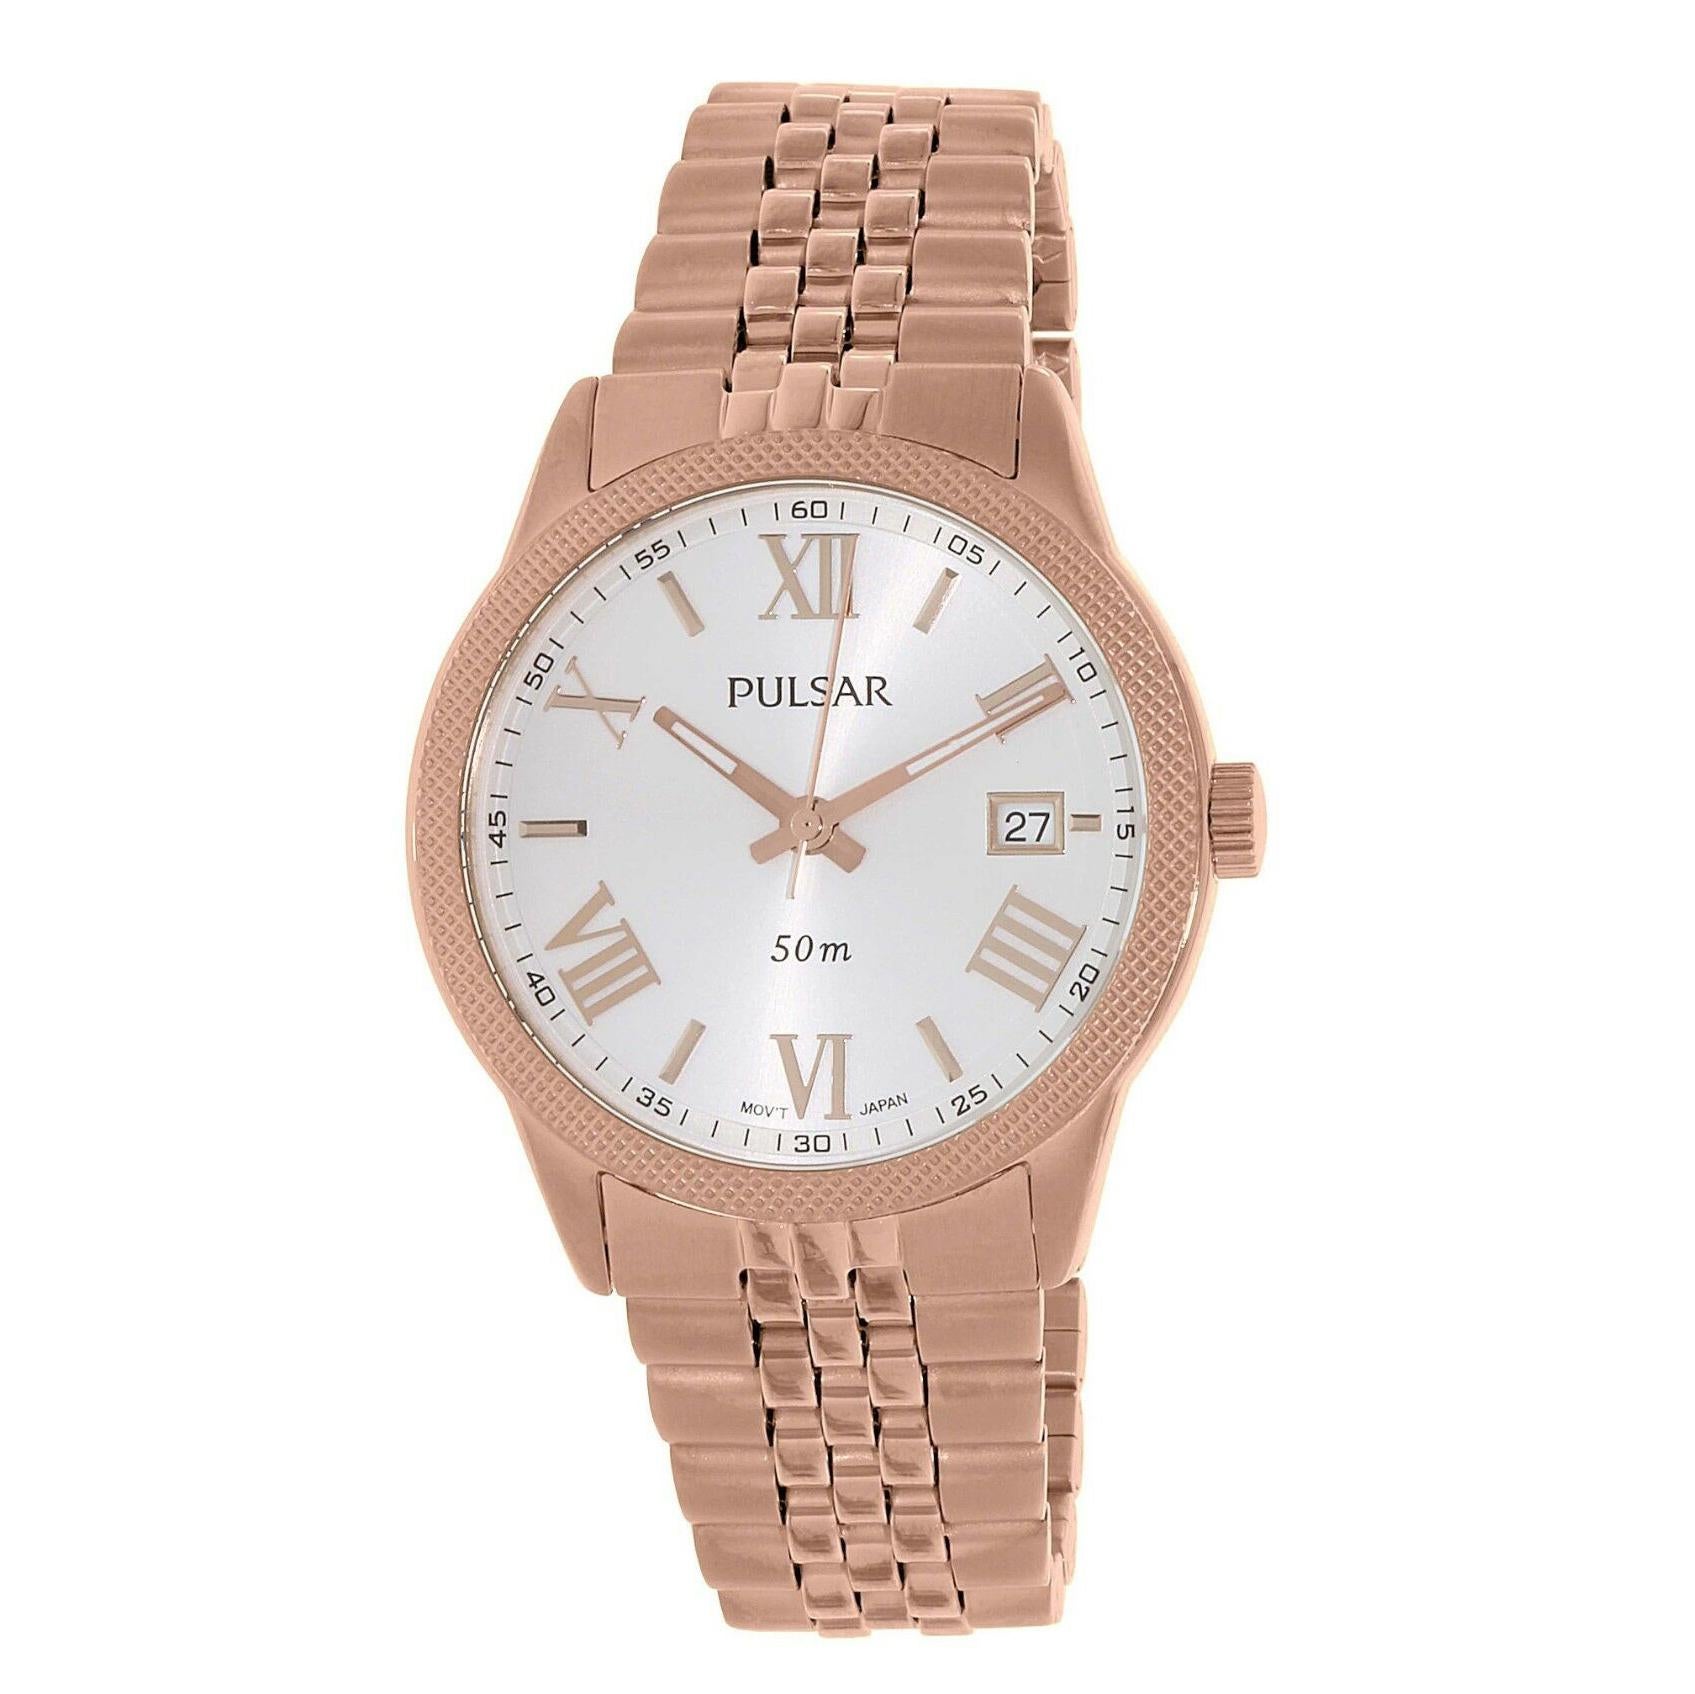 The timepiece has hairline scratches on the case and bracelet. Comes with original box.
Model Number PS9232
Brand Pulsar 
Department Women
Style Classic, Dress/Formal
Band Color Gold
Dial Color Silver
Case Color Gold
Display Analog
Dial Style Roman